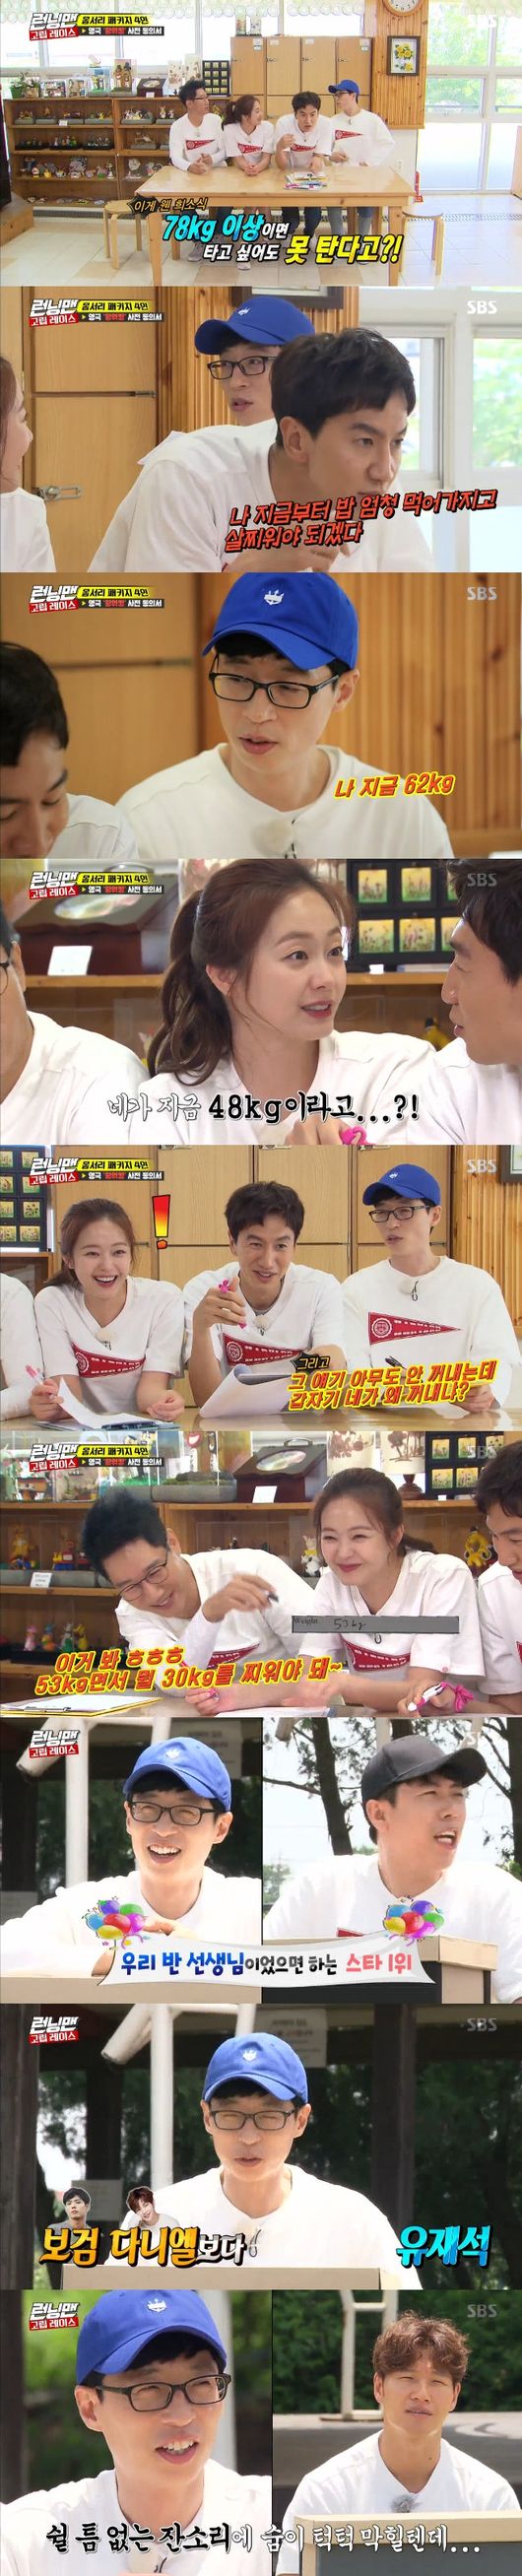 Members of Running Man released their weight.On SBS Running Man, which was broadcast on the afternoon of the 3rd, an isolation was drawn.Yoo Jae-Suk, Ji Seok-jin, Lee Kwang-soo and Jeon So-min, who won the body-surrounding package before the full-scale race, wrote a preliminary consent form for the England wingwalking.The members were attracted to the clause that people who weighed more than 80kg could not ride, especially when they said that the water was up to 76kg.We will prepare items that can lose a lot of weight before recording to prevent such tricks, the production team said firmly.Yoo Jae-Suk is now 62kg, and Jeon So-min says he should get 30kg more. Why do not you bring it up when no one is talking about it?Do not Lie. Then, Jeon So-min wrote 53kg in a box that wrote the weight and released his weight.Yoo Jae-Suk was envious of the teachers day survey, as it was ranked as the number one star who wanted to be a teacher in our class, surpassing Park Bo-gum and Kang Daniel.The members said, I decided to get tired. The nagging is very bad.If the end was a teacher, I would probably not be able to go to school, said Yoo Jae-Suk, who responded that he did not understand.Capture the Running Man screen